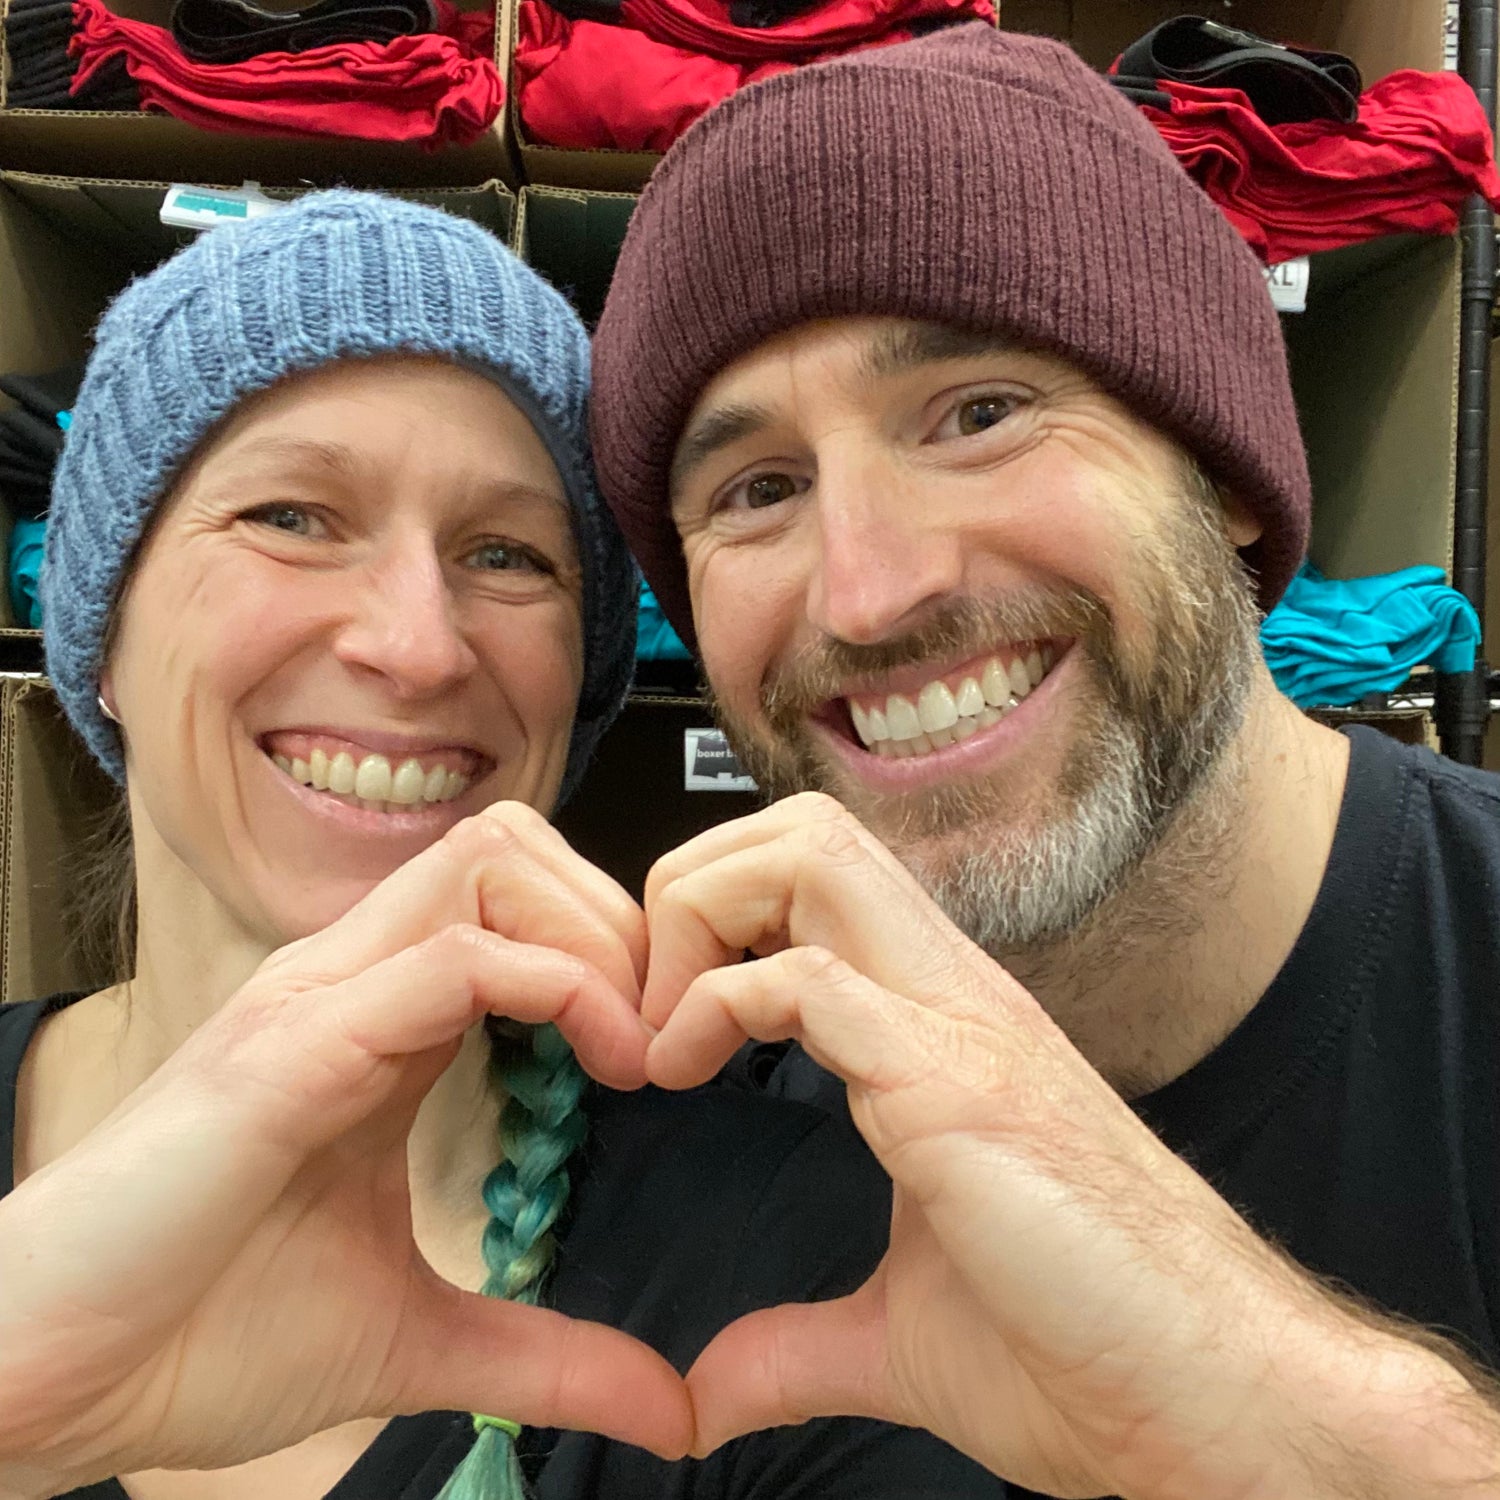 rob and sarah, co-founders of do and dare undie co, smiling and looking at the camera while making a heart with their hands